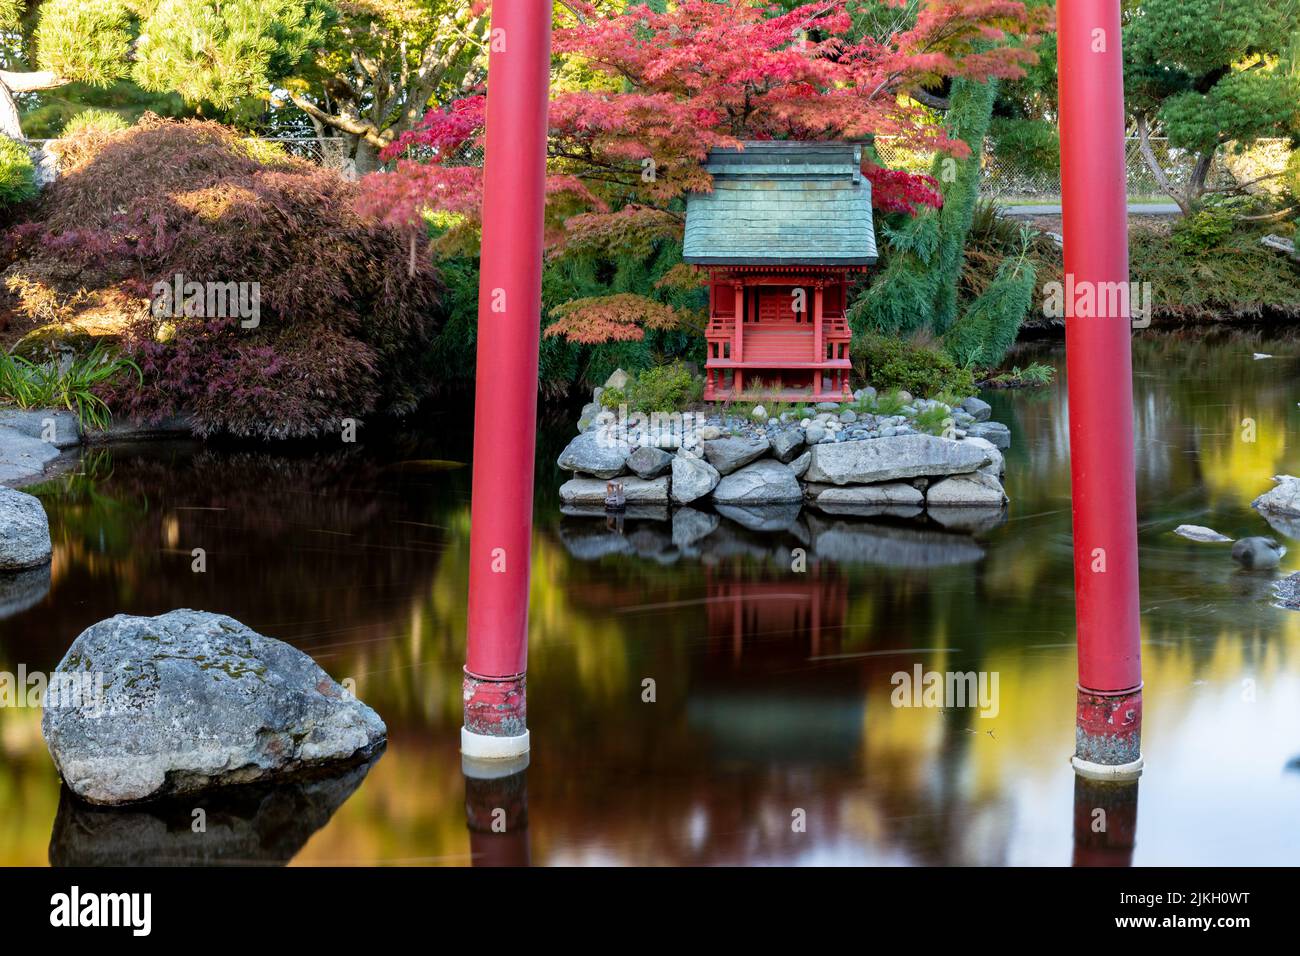 Still Water in Japanese Garden Pond with Red Pagoda and Torii Gate in Point Defiance Park, Tacoma, WA Stock Photo